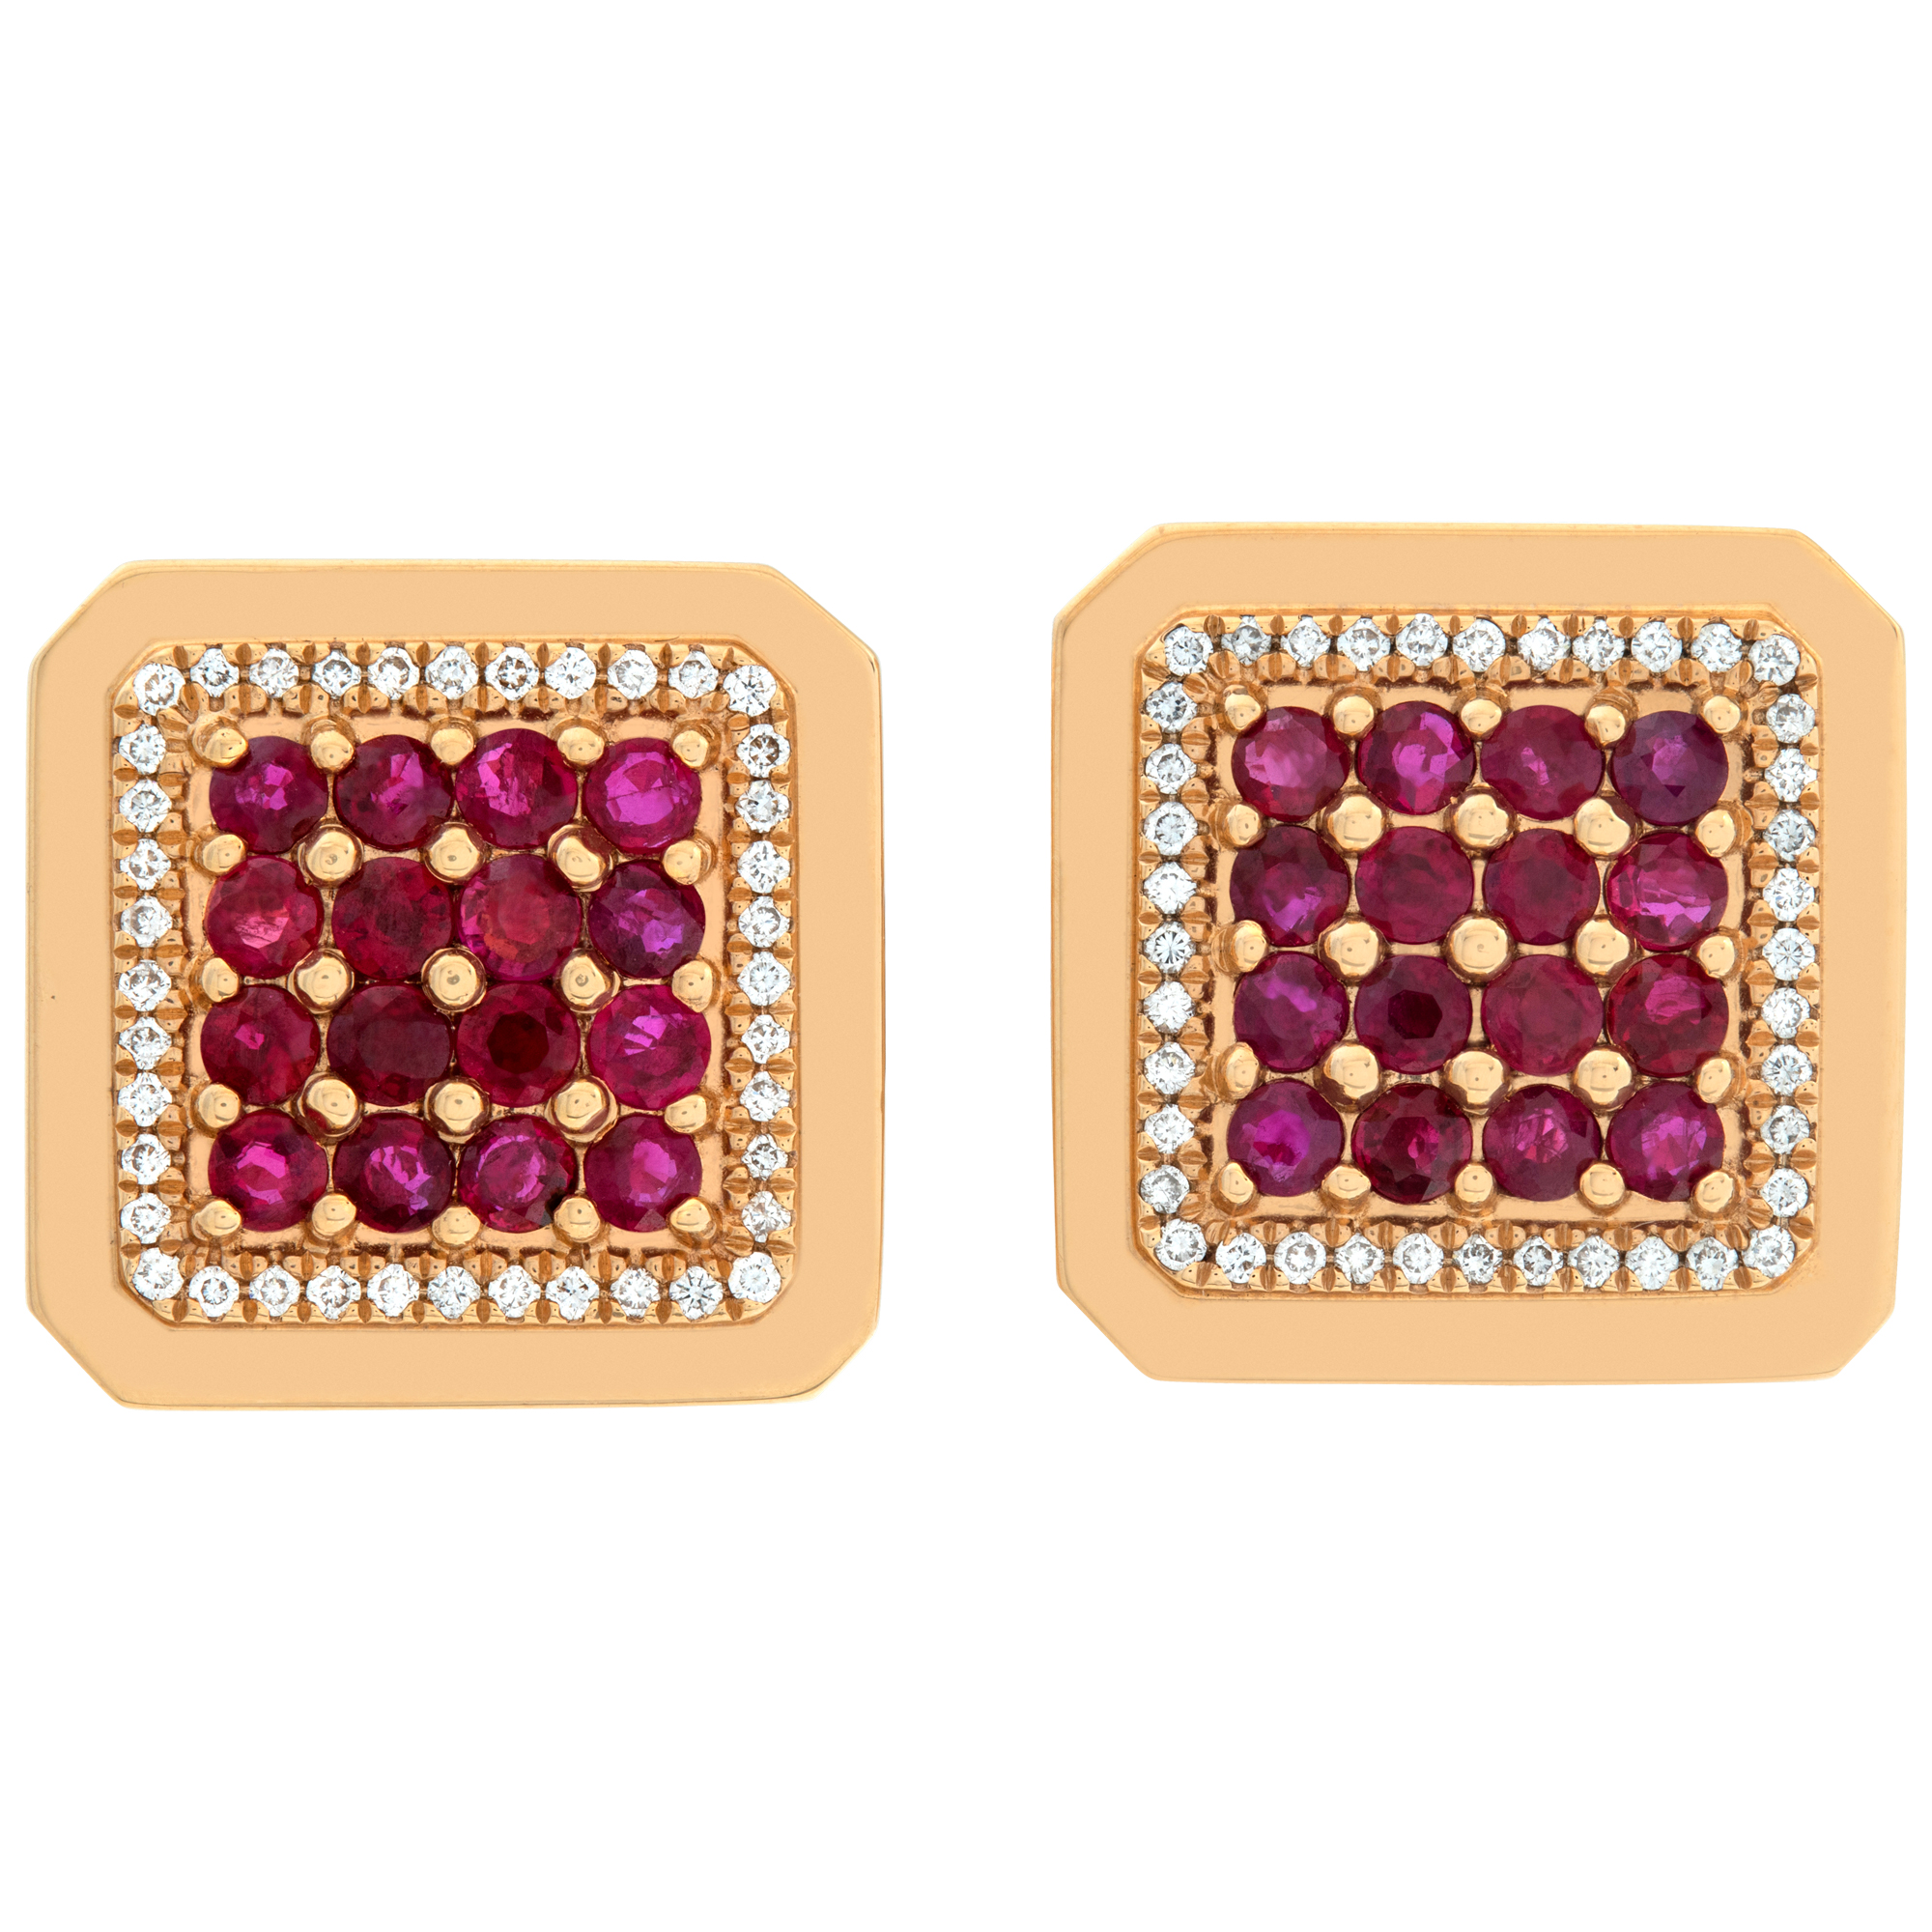 Ruby & diamonds square cufflinks, set in 18k yellow gold. Total round cut ruby approx. weight: 3.20 carats.